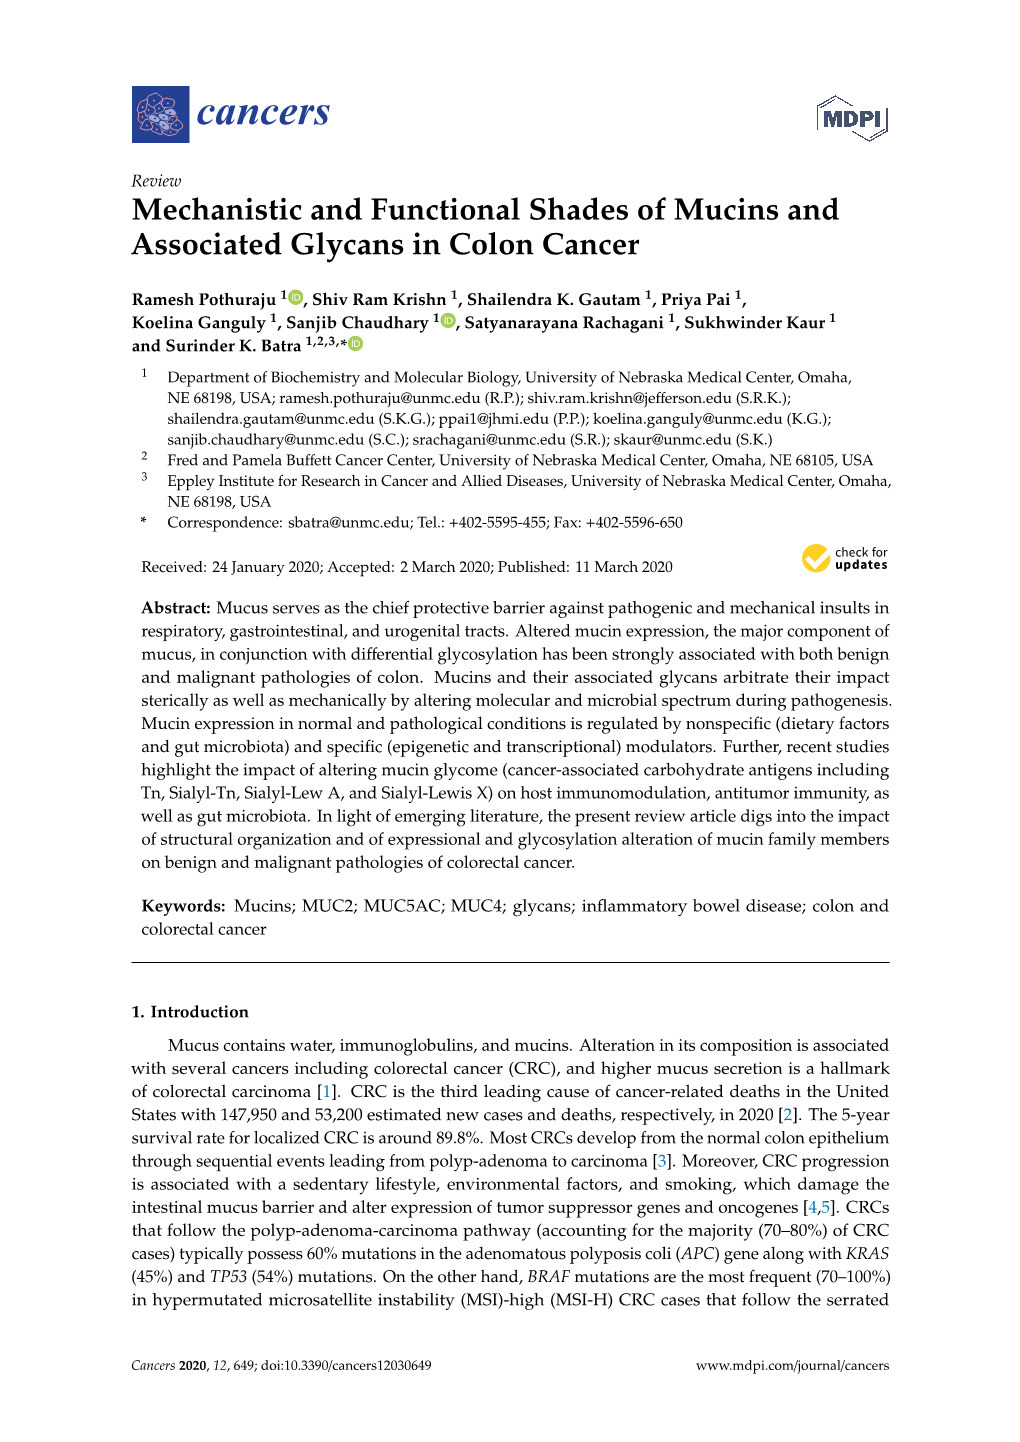 Mechanistic and Functional Shades of Mucins and Associated Glycans in Colon Cancer